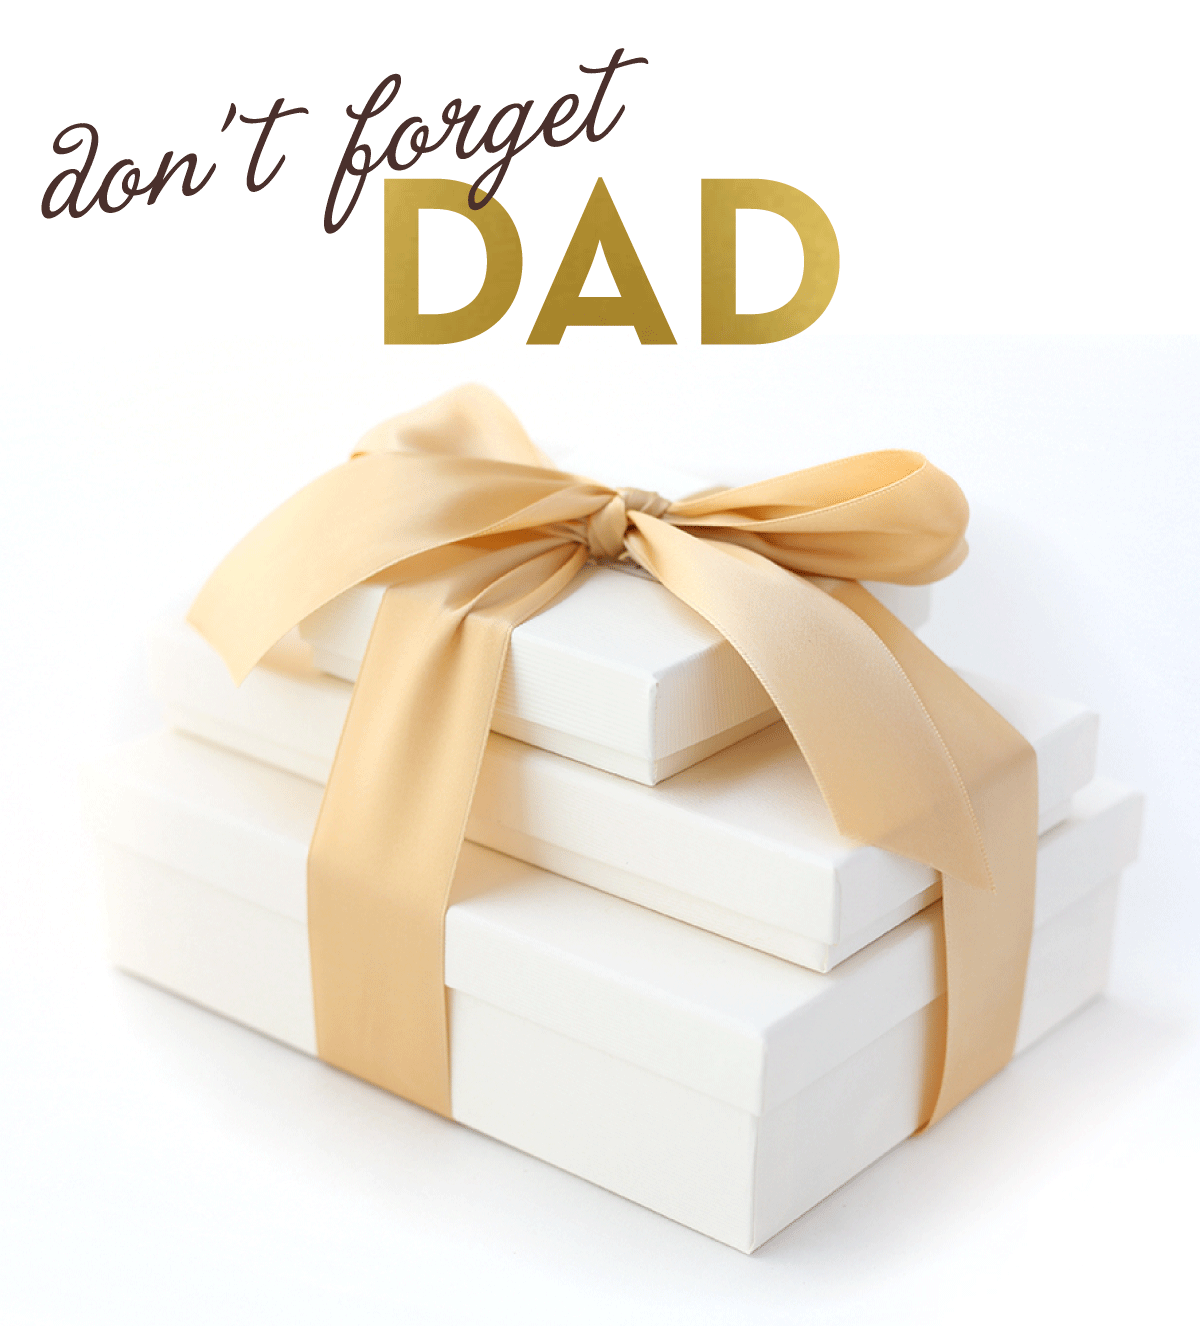 Dads love chocolate, too, and there is still time to send something sweet for Father''s Day!  Save 20% on orders of $75 or more using code SWEETDAD at checkout, today and tomorrow only!*